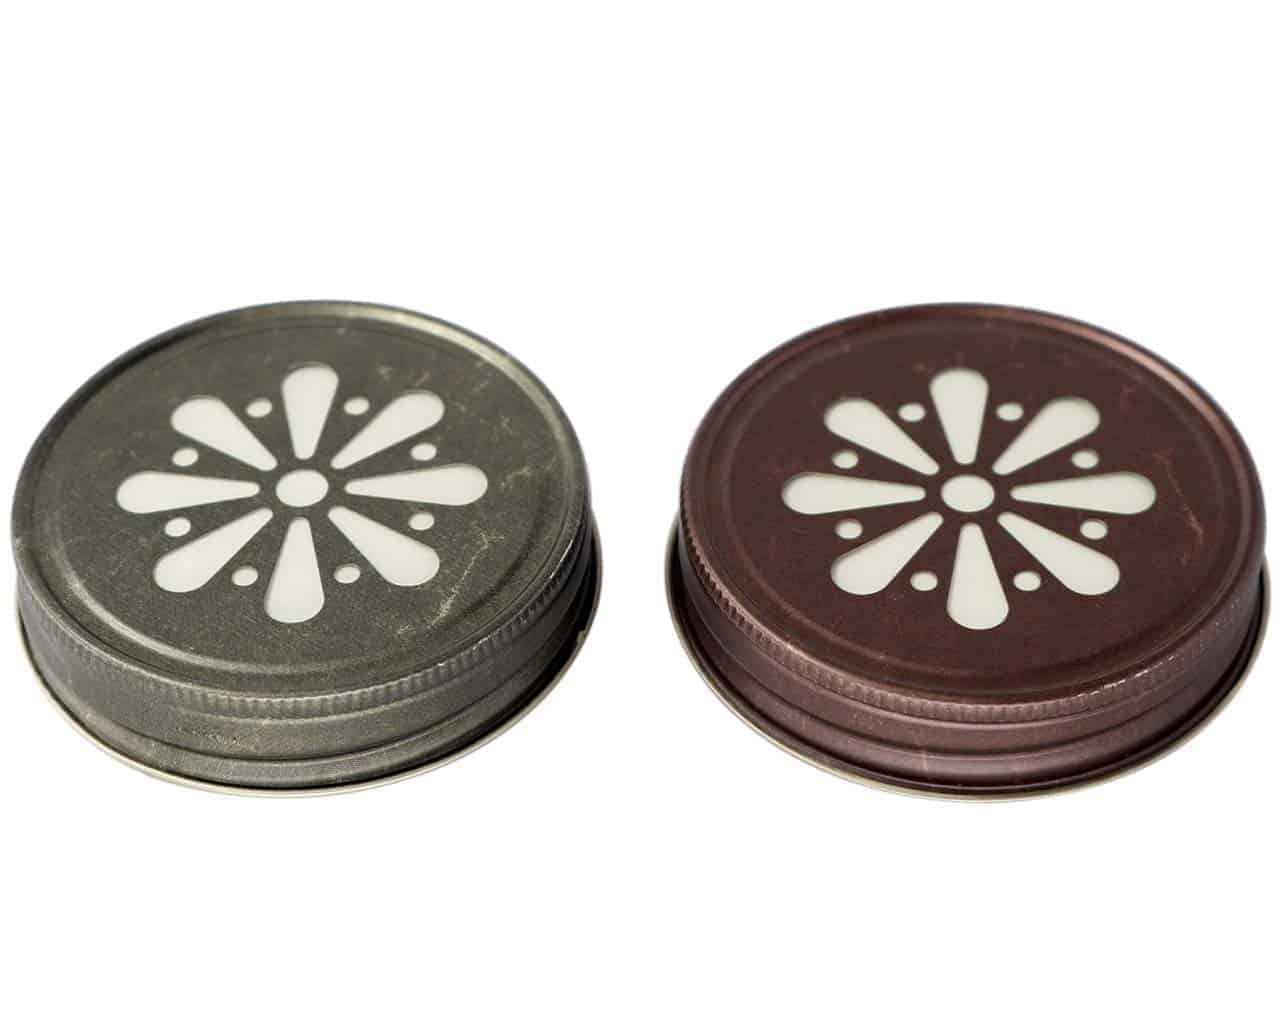 Antique pewter and bronze daisy lids with foam liner for regular mouth Mason jars